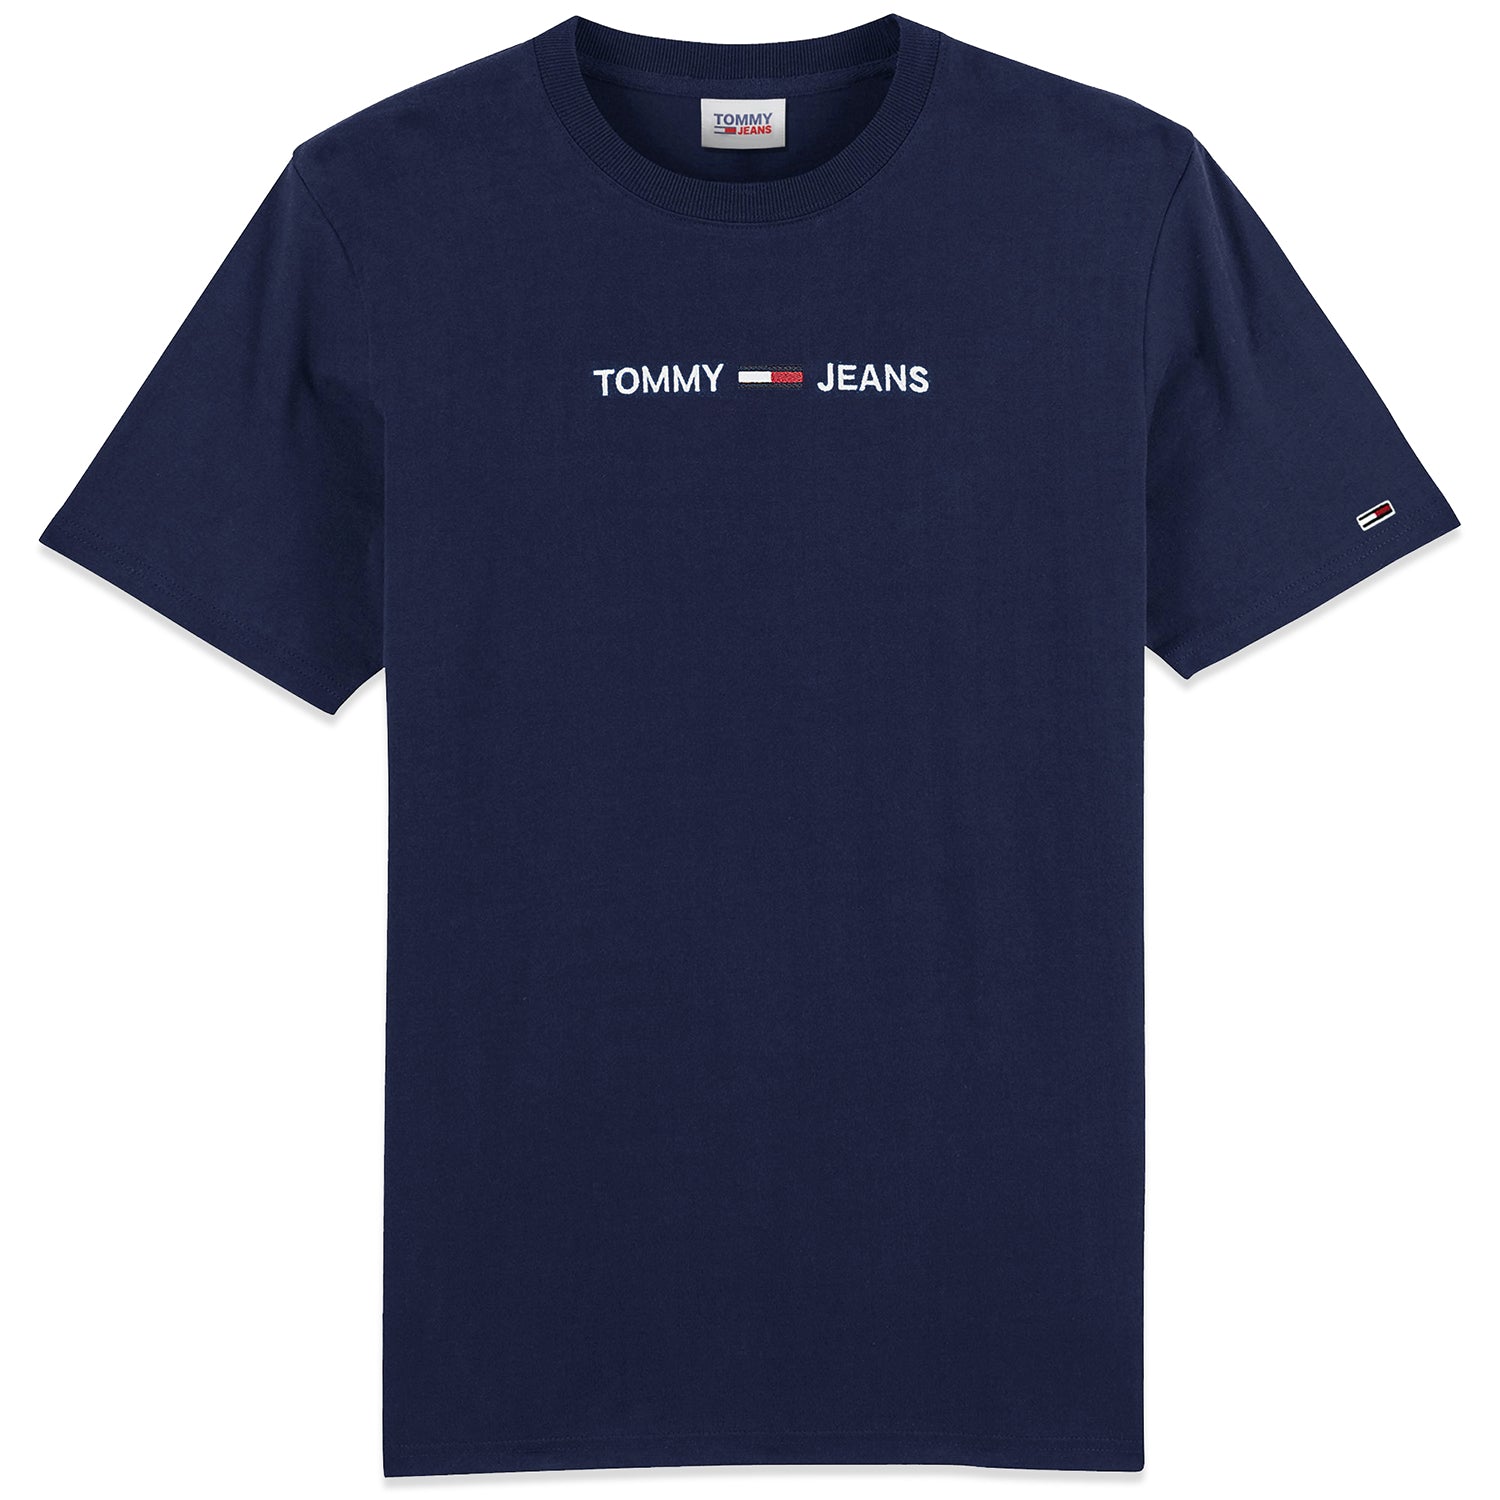 Tommy Jeans Logo Embroidery T-Shirt - Twilight Navy